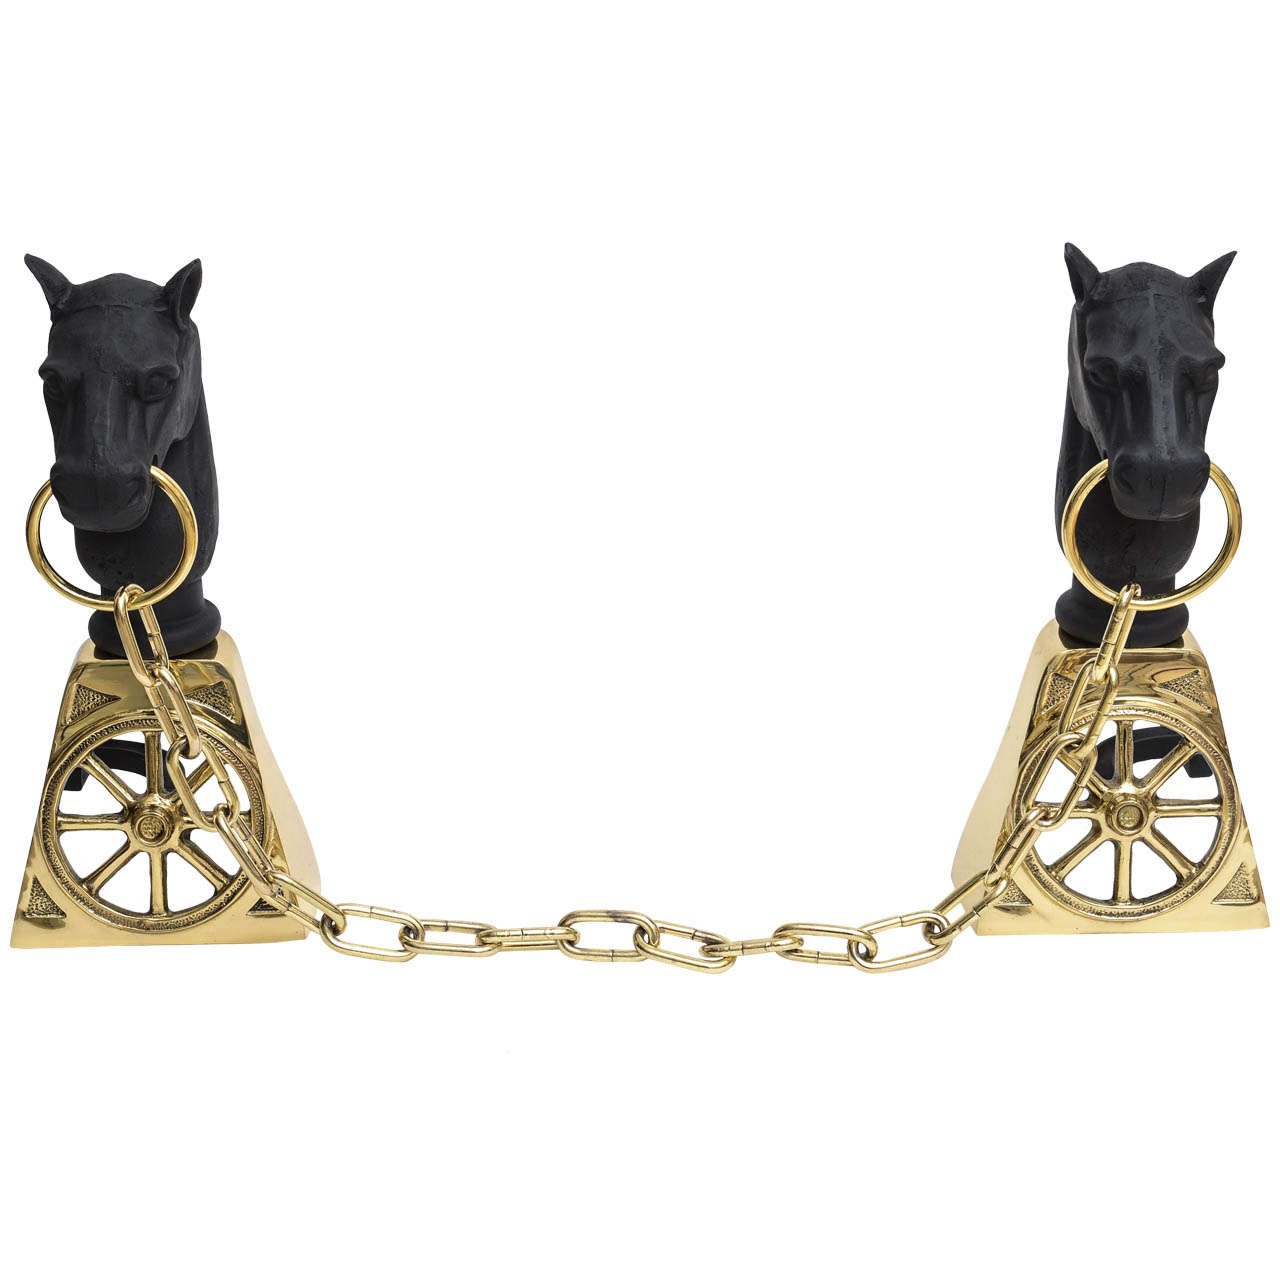 Equestrian Style Cast Iron and Brass Fireplace Andirons with Horse Head and Bit